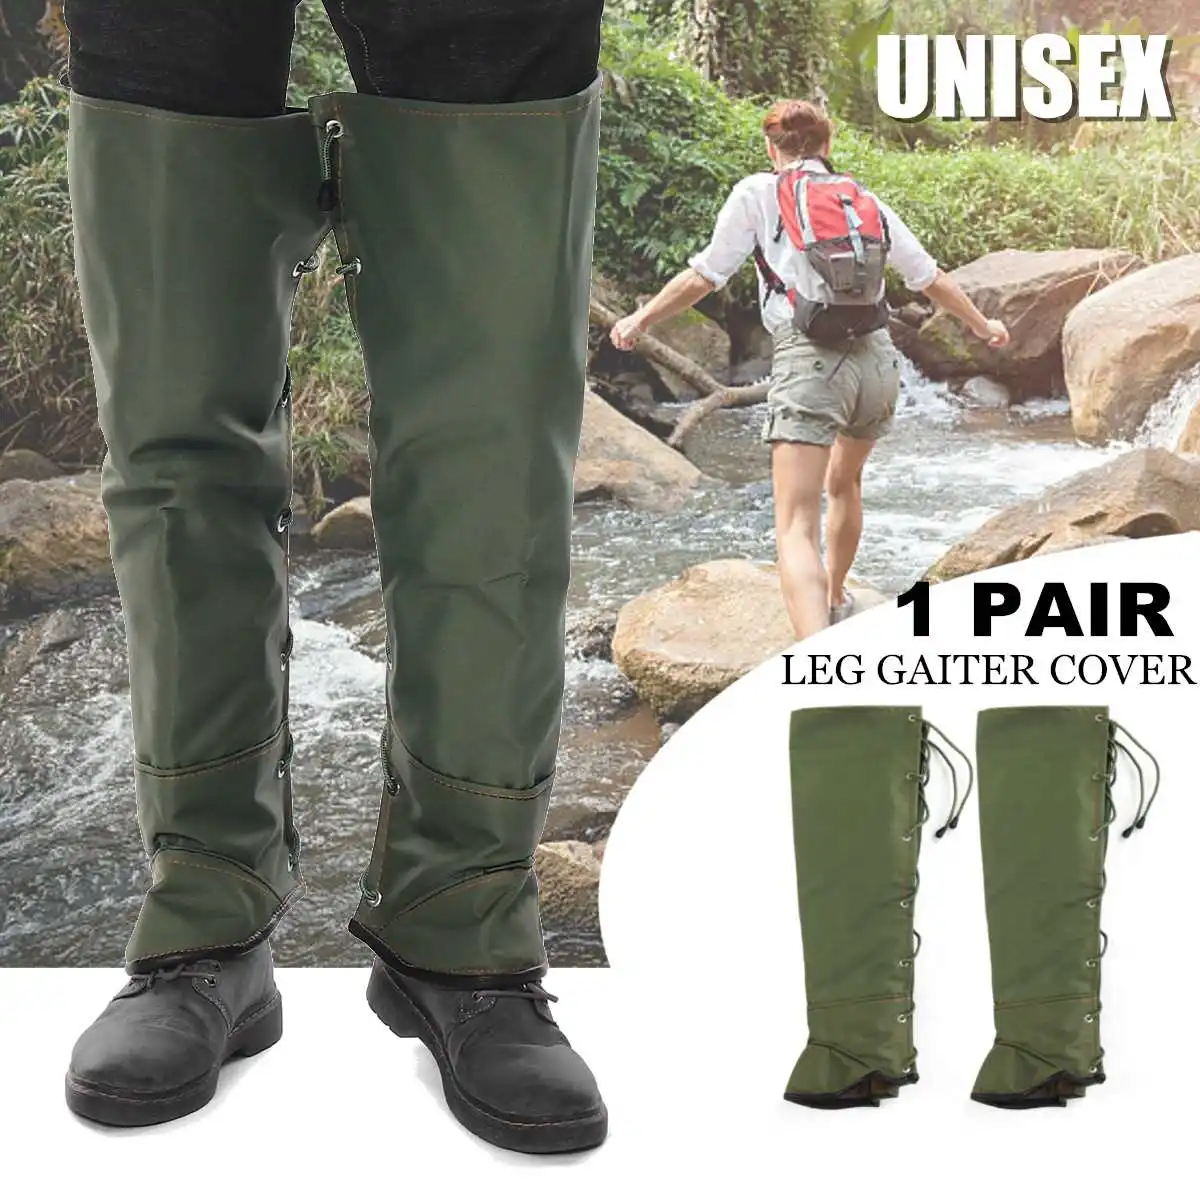 Anti Bite Snake Guard Leg Protection Gaiters Cover Outdoor For Hiking Camping 